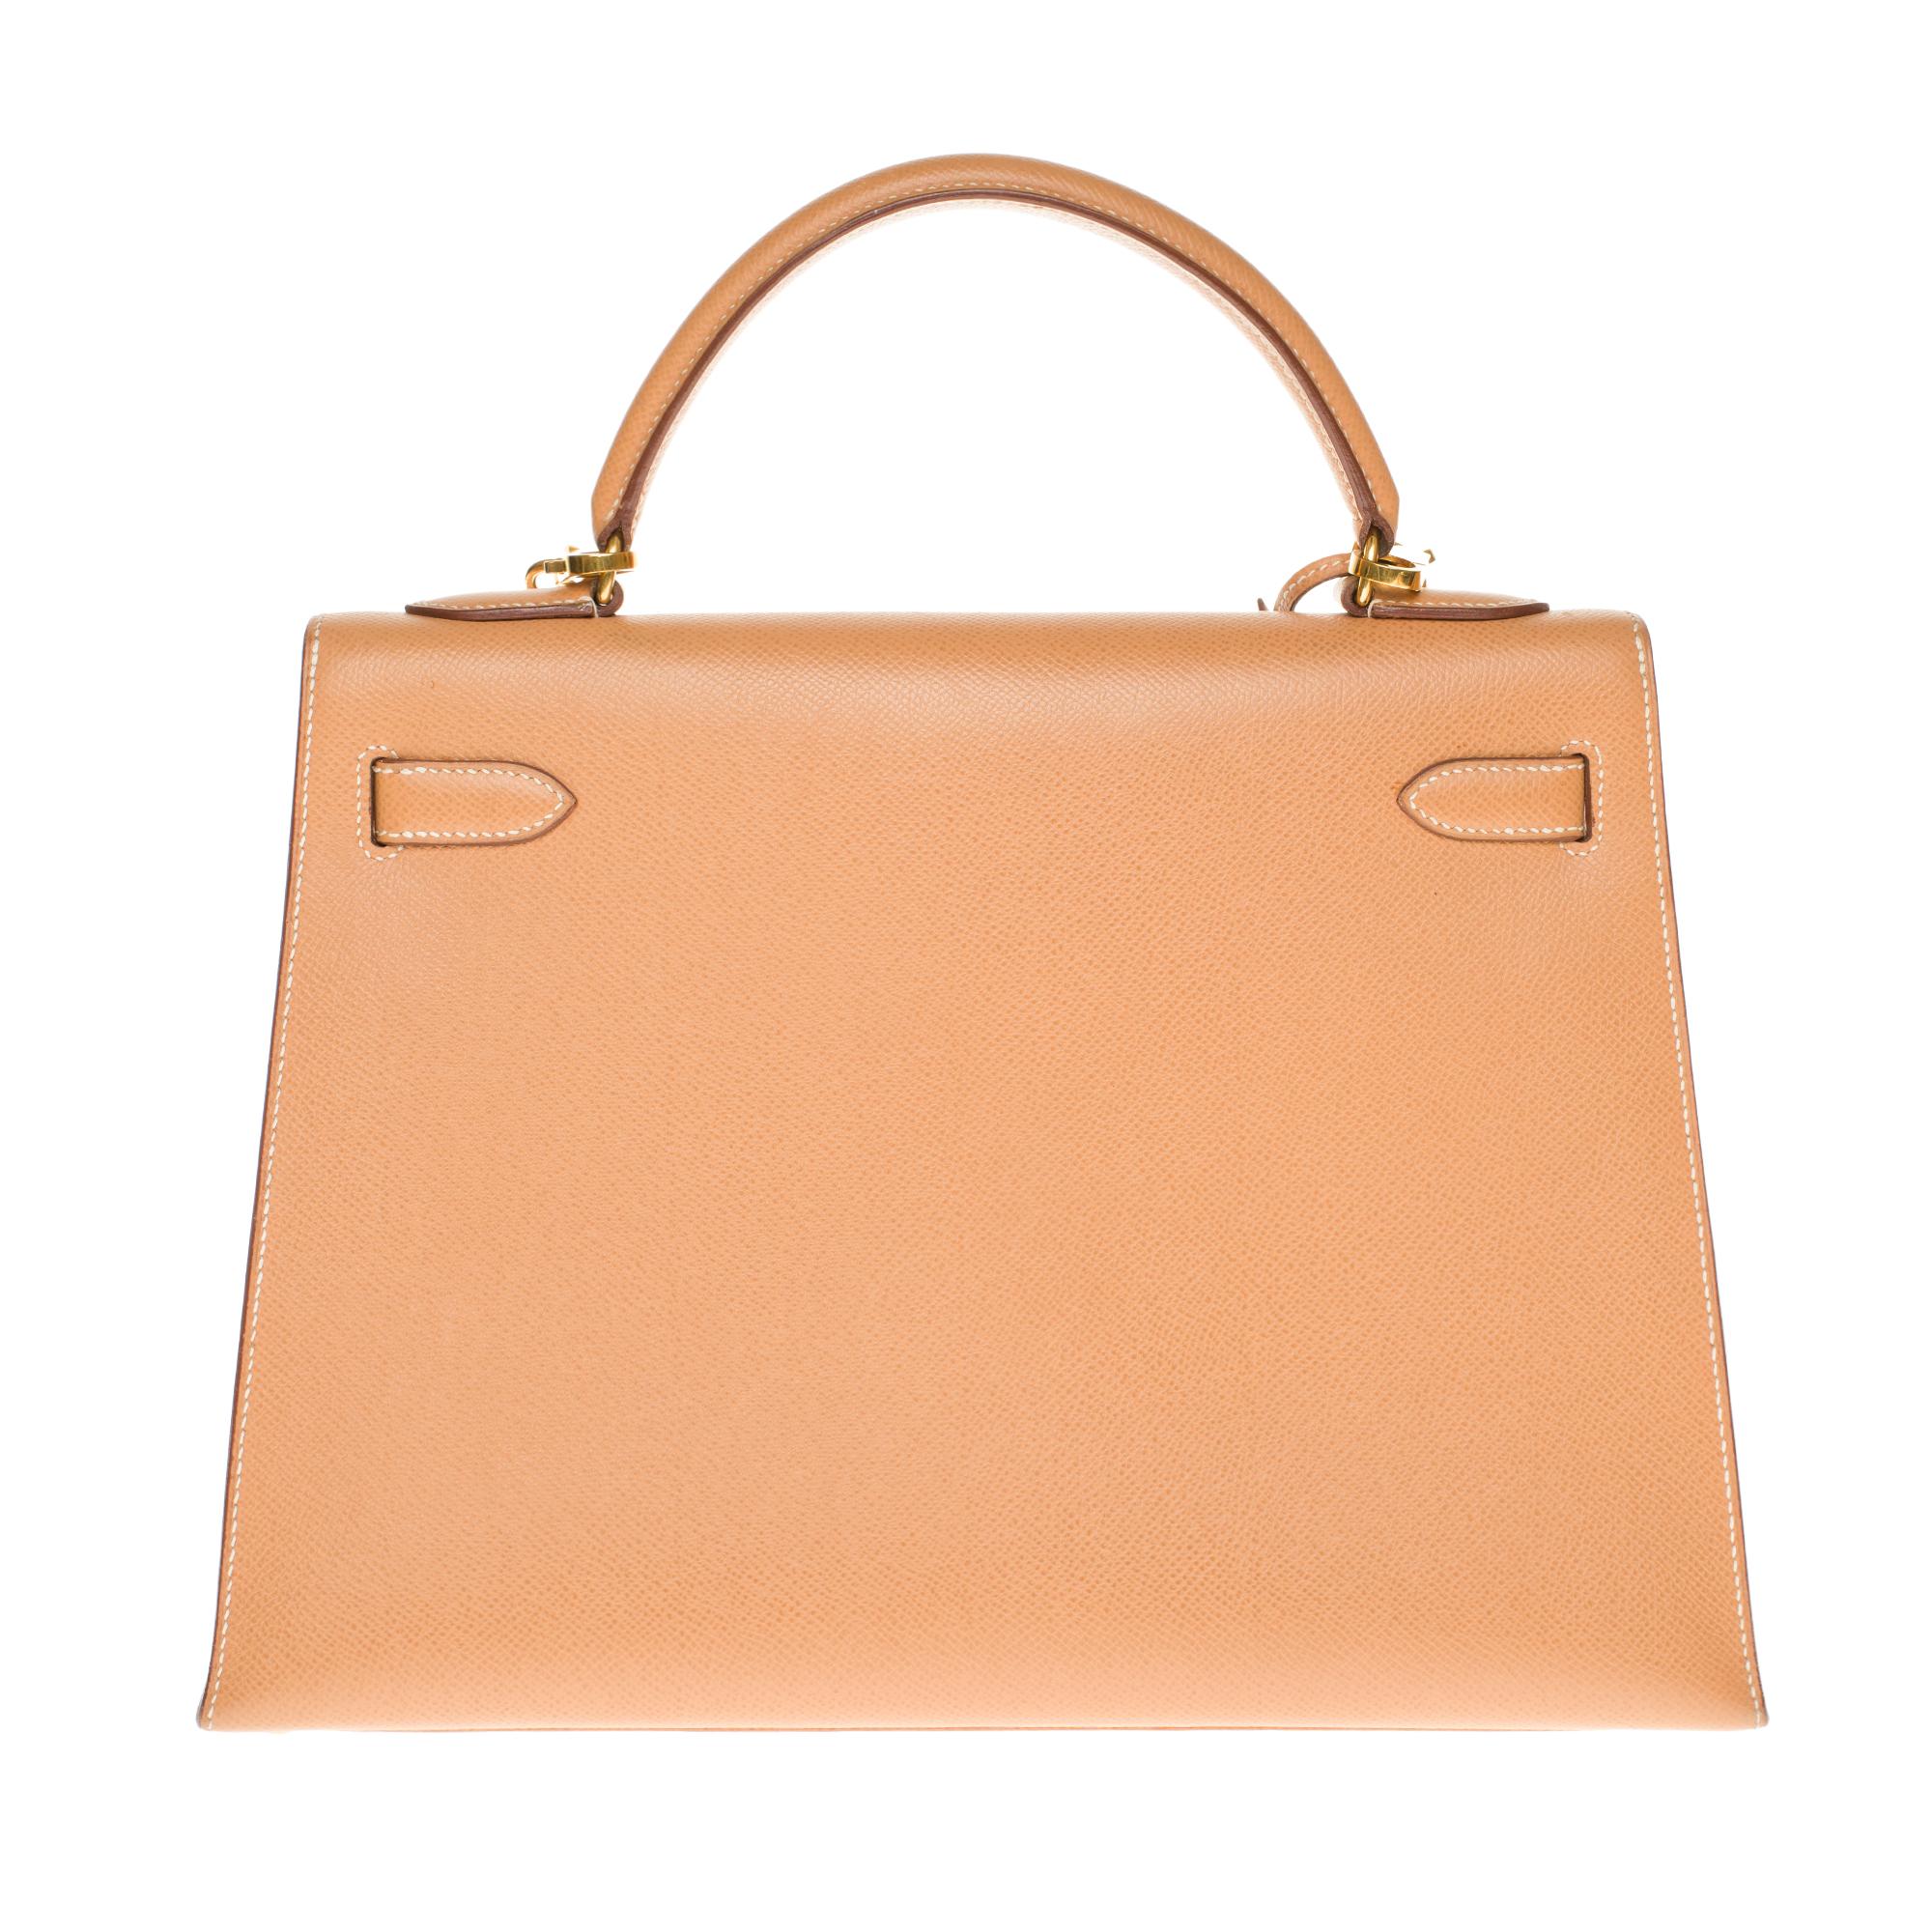 Gorgeous Hermes Kelly sellier 32 cm handbag in Courchevel Gold leather, gold-plated metal trim, single handle in gold courchevel leather, a removable shoulder strap allowing a hand or shoulder support.
Closure by flap.
Gold leather inner lining, one